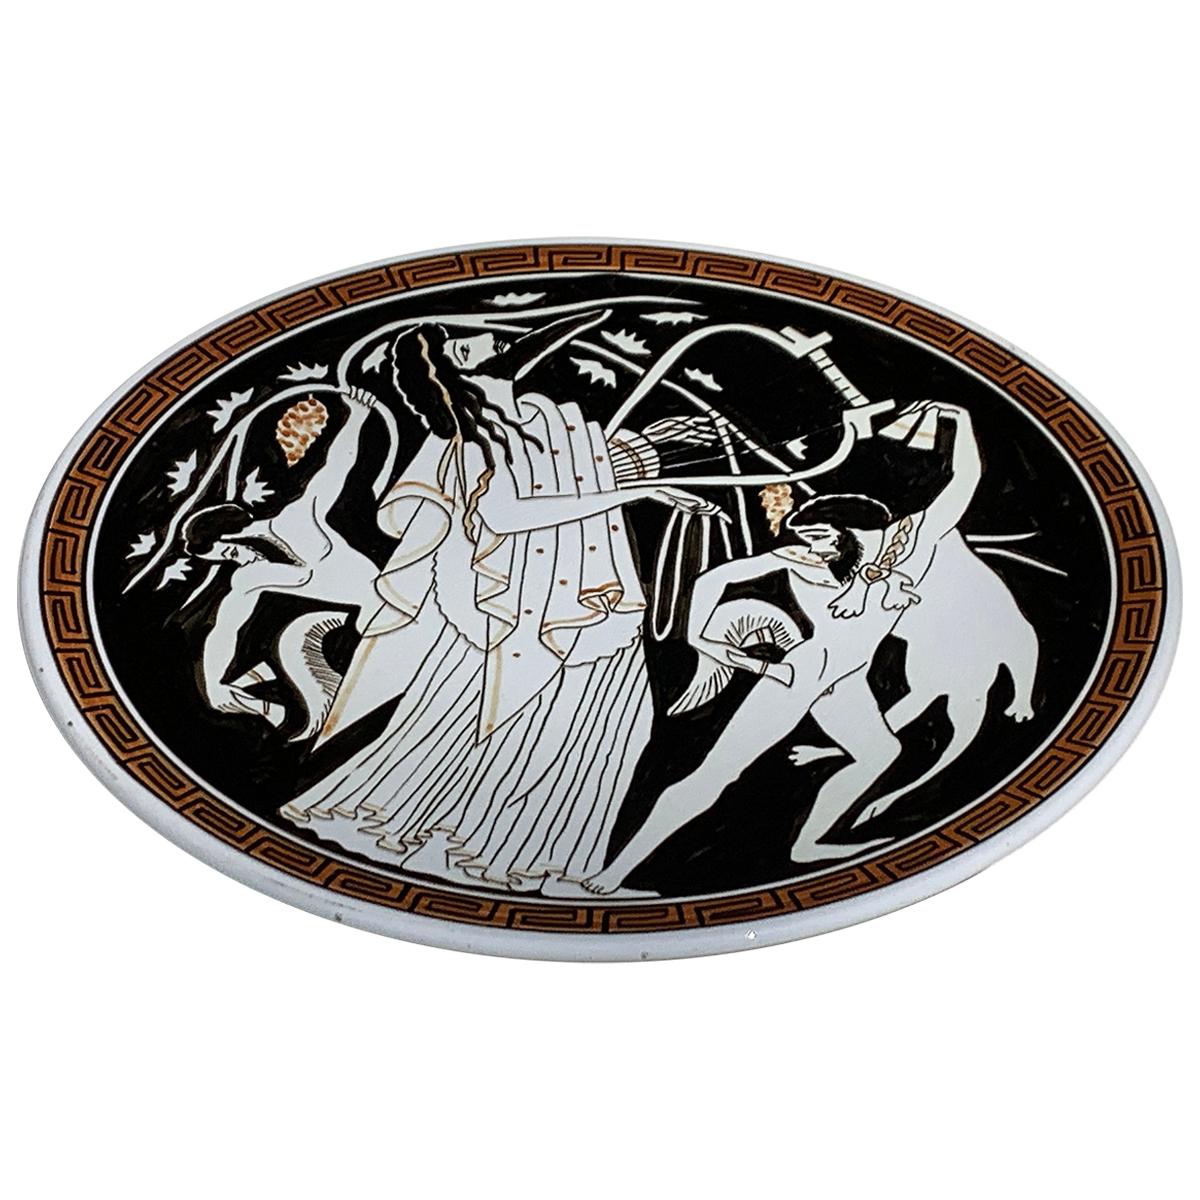 Hand Painted Ceramic Greek Plate For Sale